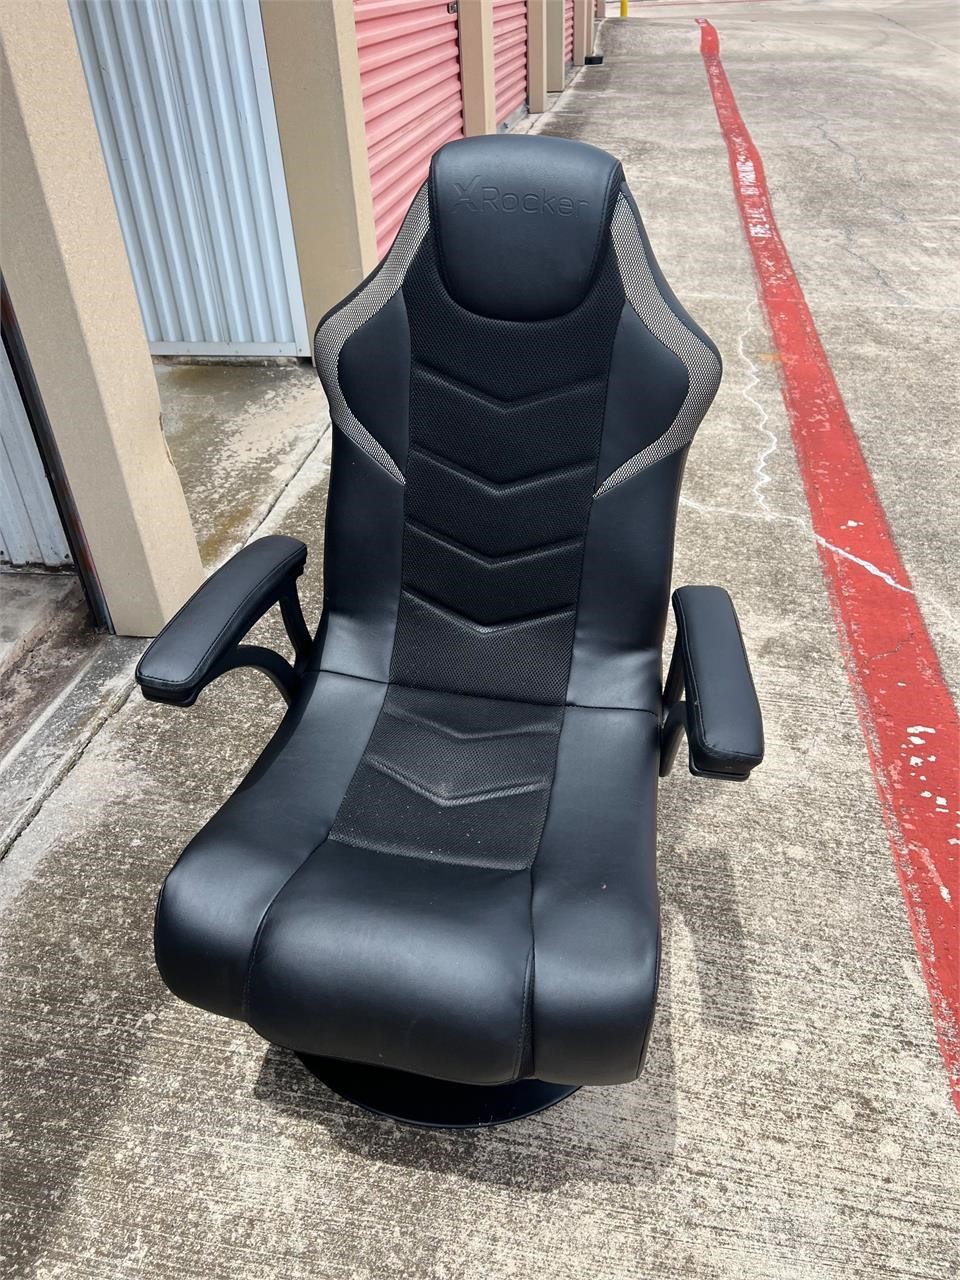 X Rocker Gaming Chair with Base